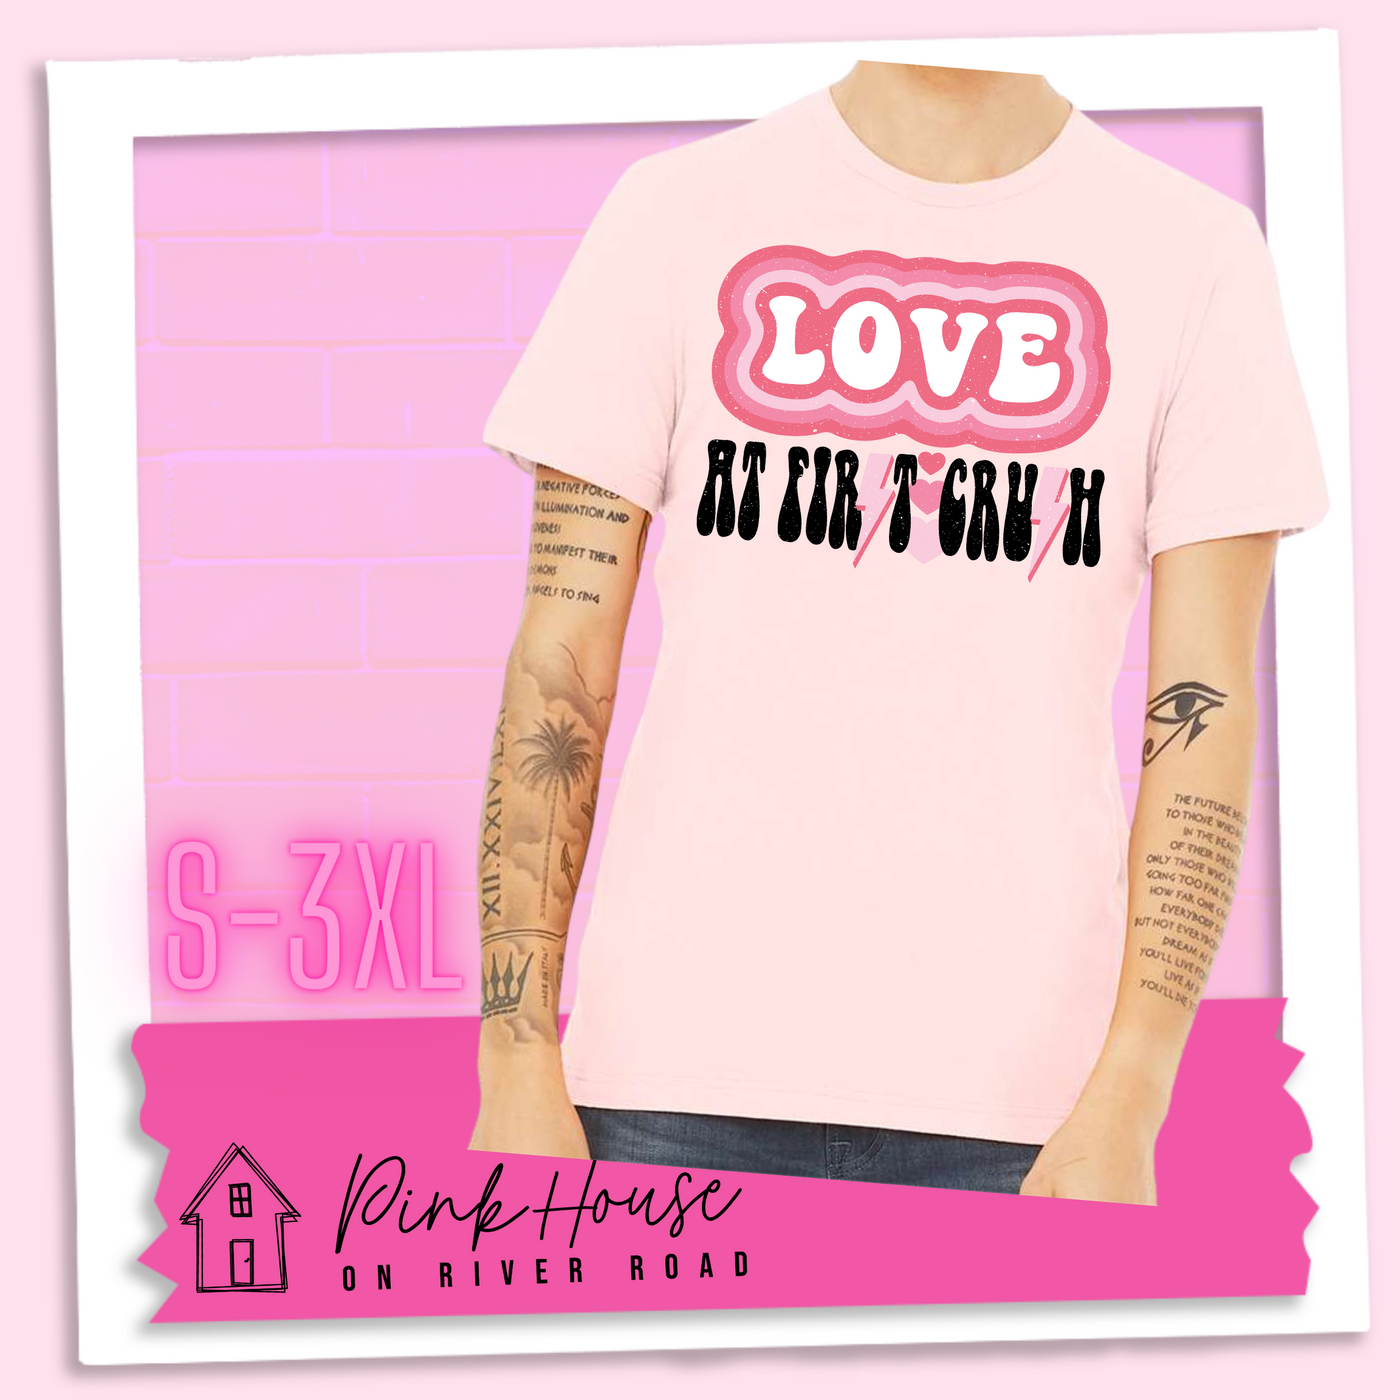 Soft Pink Tee. The graphic has the word Love in retro bubble letters with differetn colored pink outlines radiating from the word, underneath are the worxs at first in black with the s in first replaced with a pink lightning bolt, then there are three different colored hearts followed by the word crush in the same black font with the S replaced with the same pink lightening bolt.